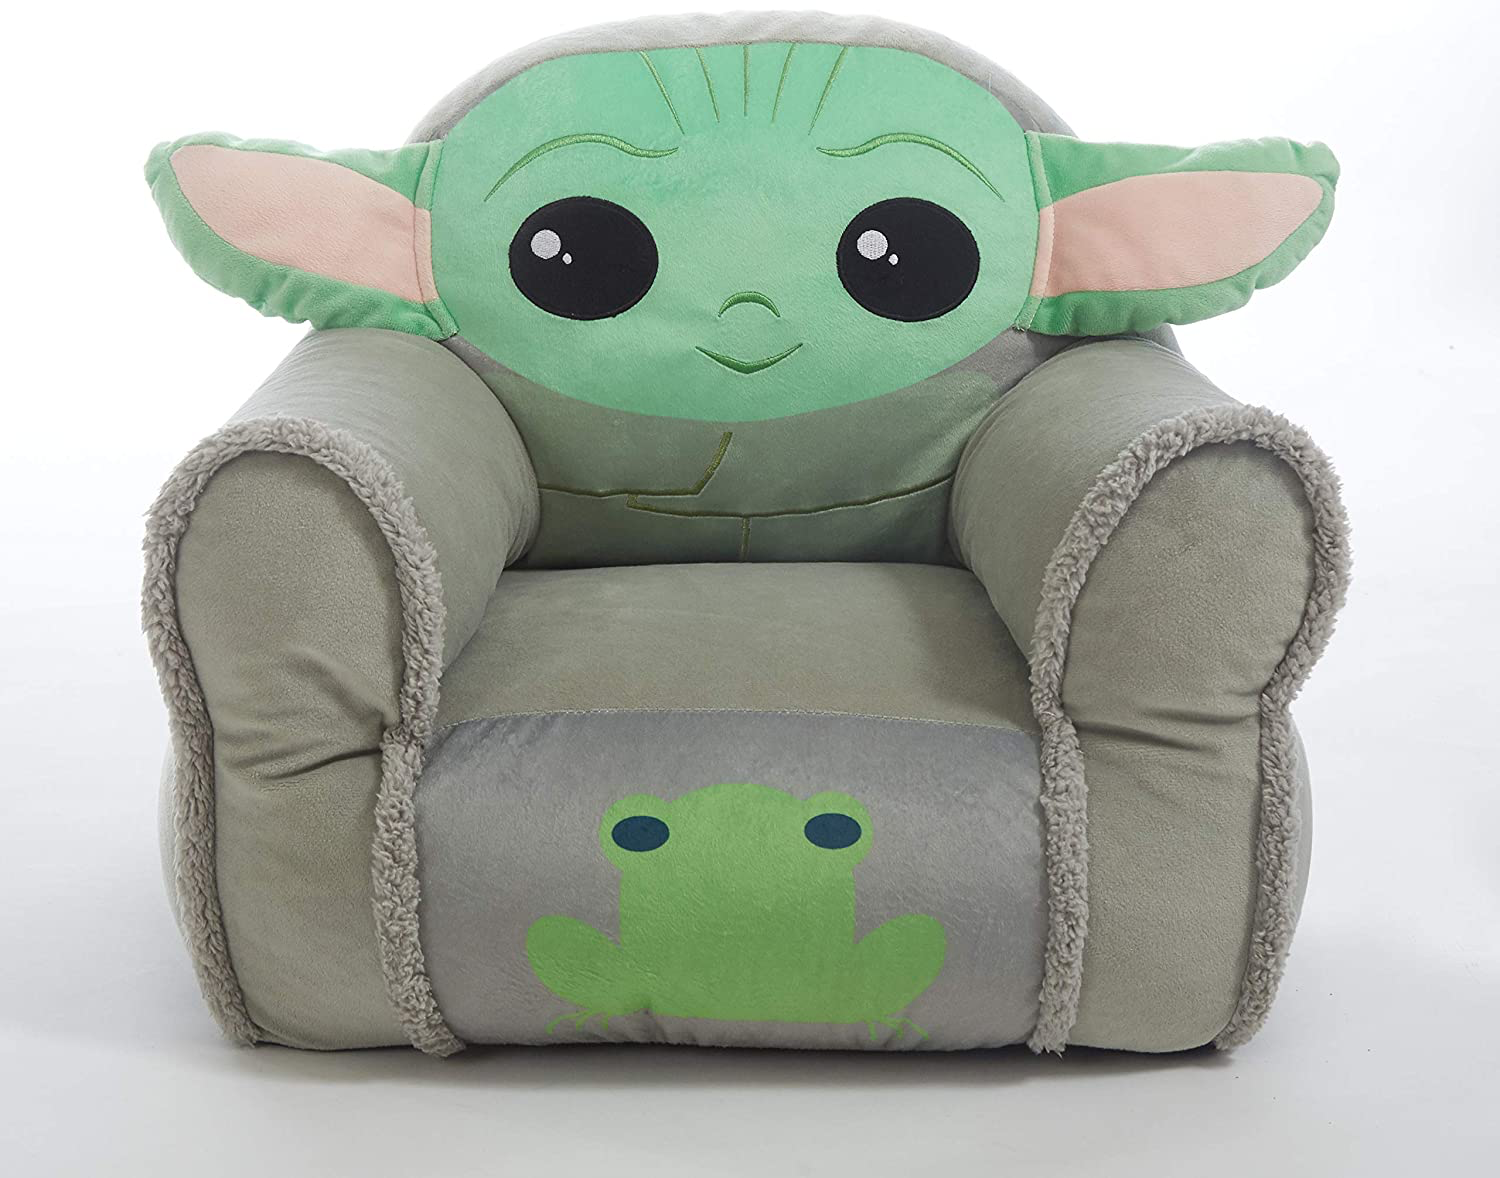 New The Mandalorian The Child Figural Bean Bag Chair available! | The